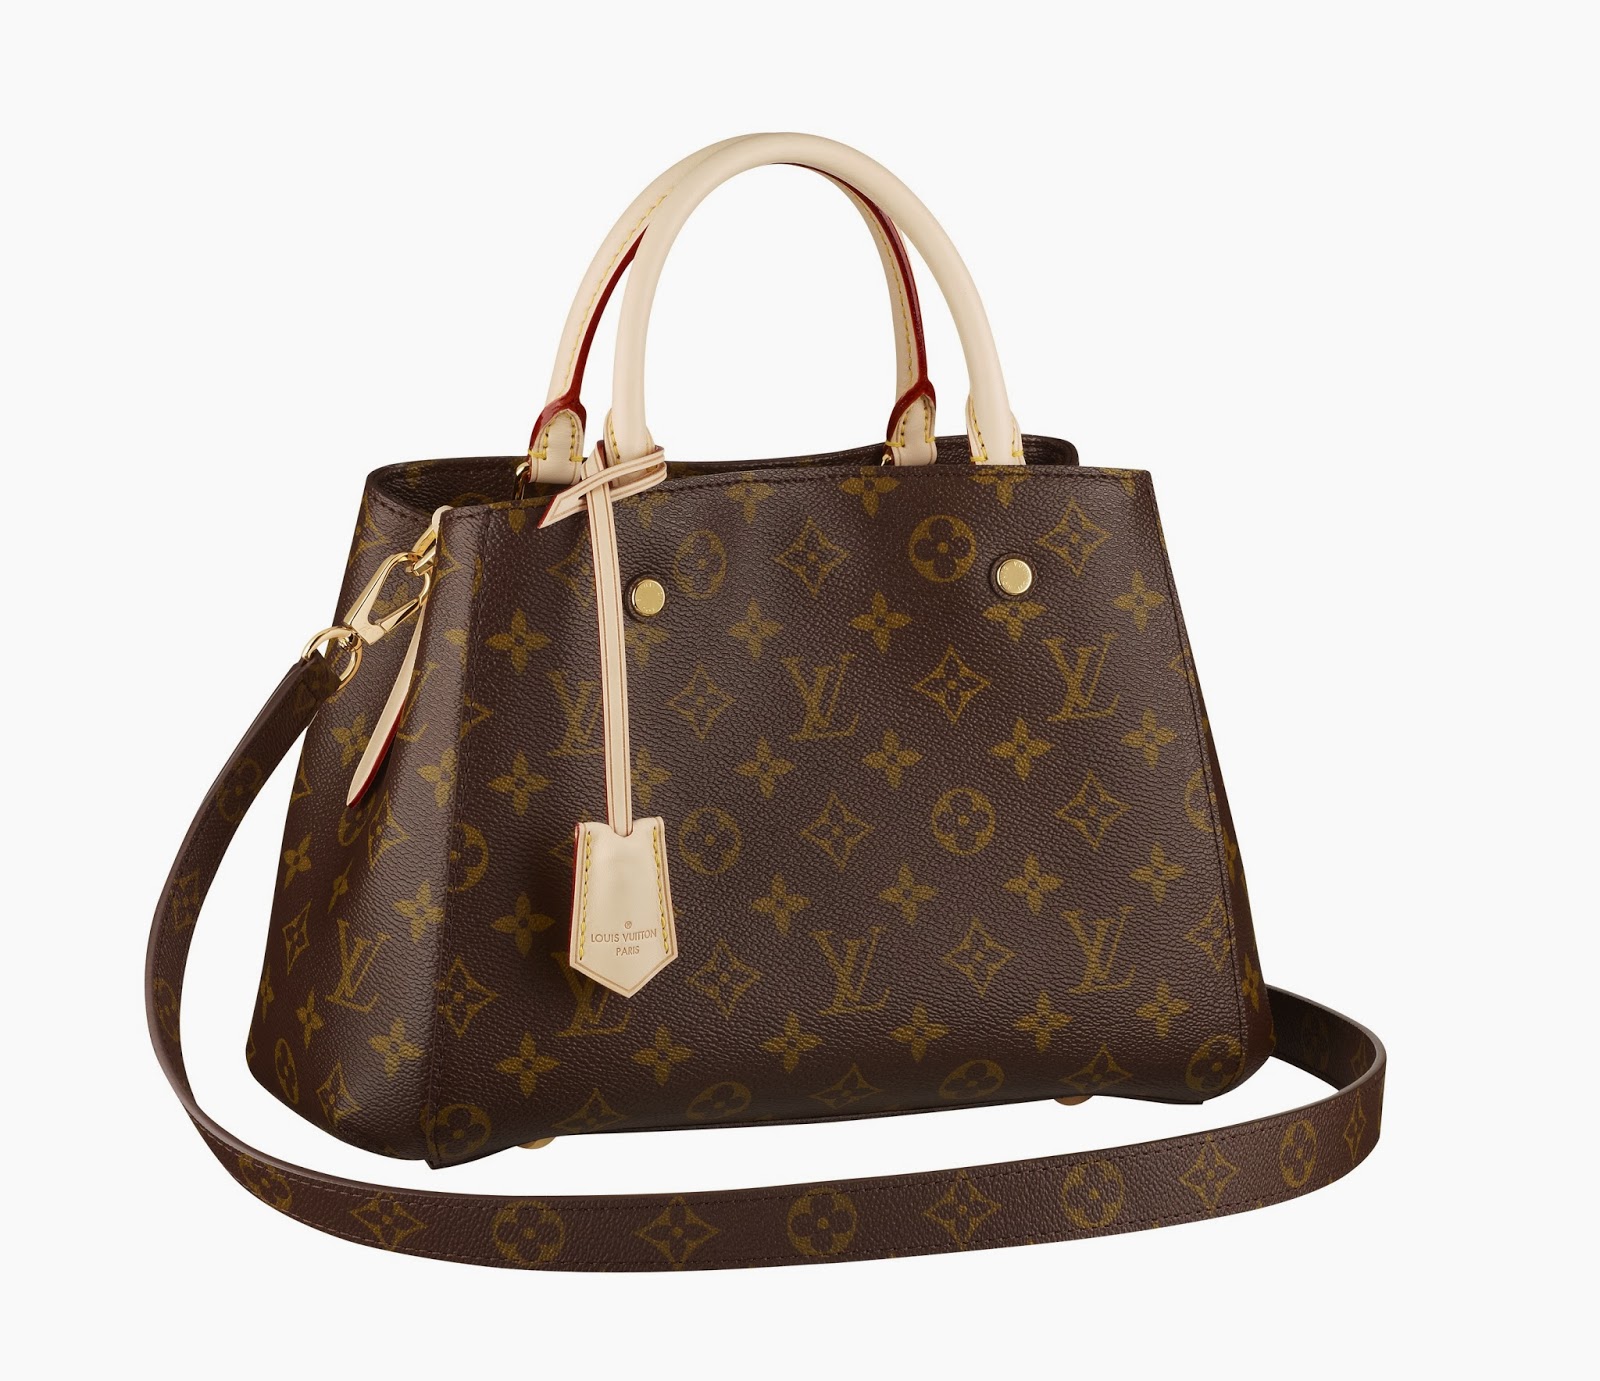 Lv Handbags Bag Price | Confederated Tribes of the Umatilla Indian Reservation